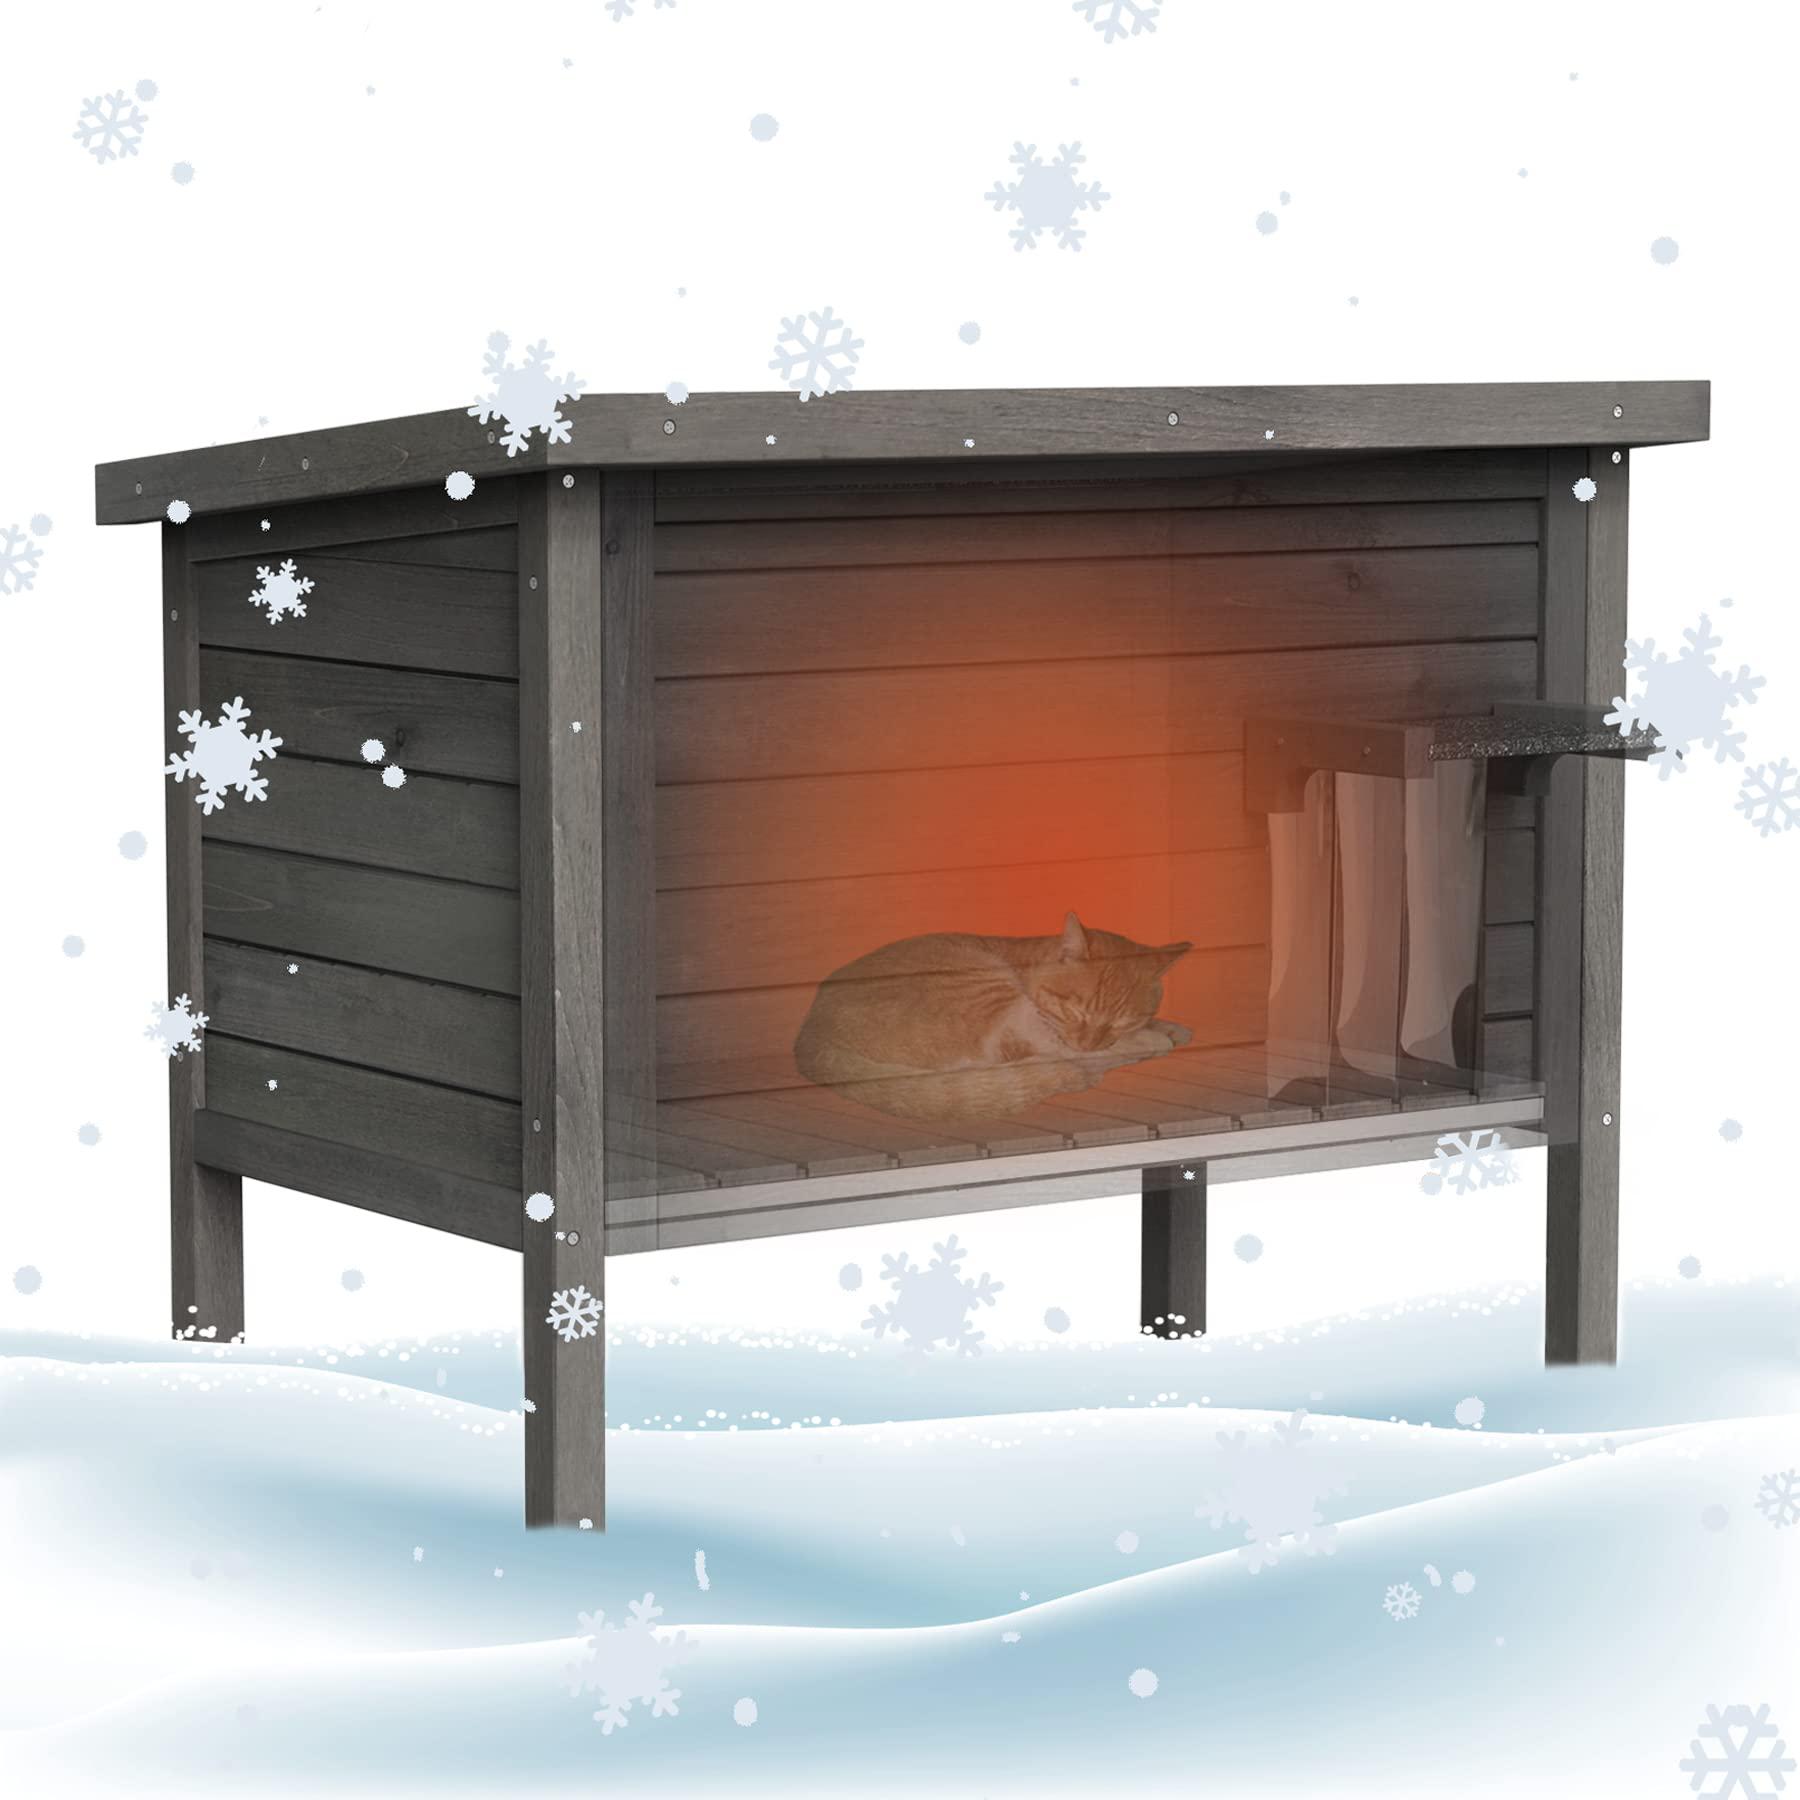 gdlf outdoor cat house feral cat enclosure 100% insulated all-round foam weatherproof solid wood large size for multiple cats